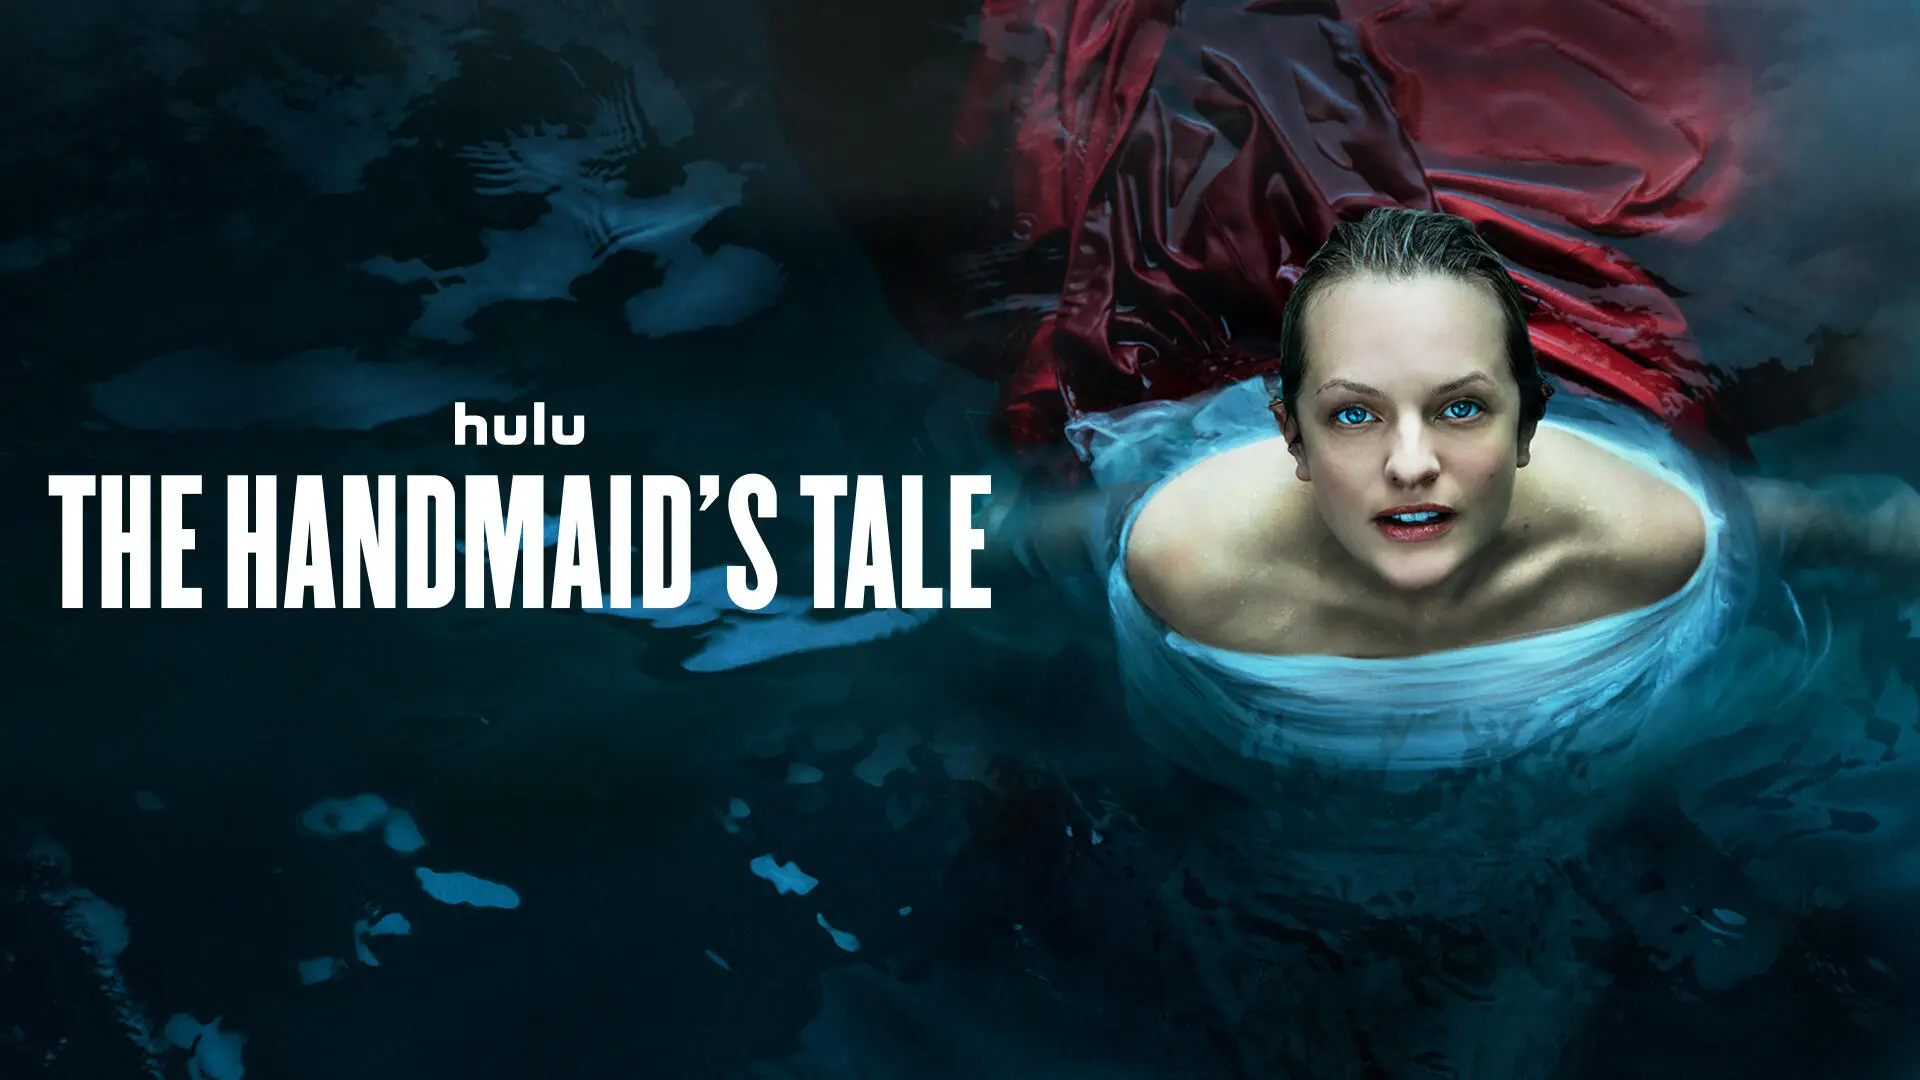 The Handmaid's Tale season 5: How many episodes are there?